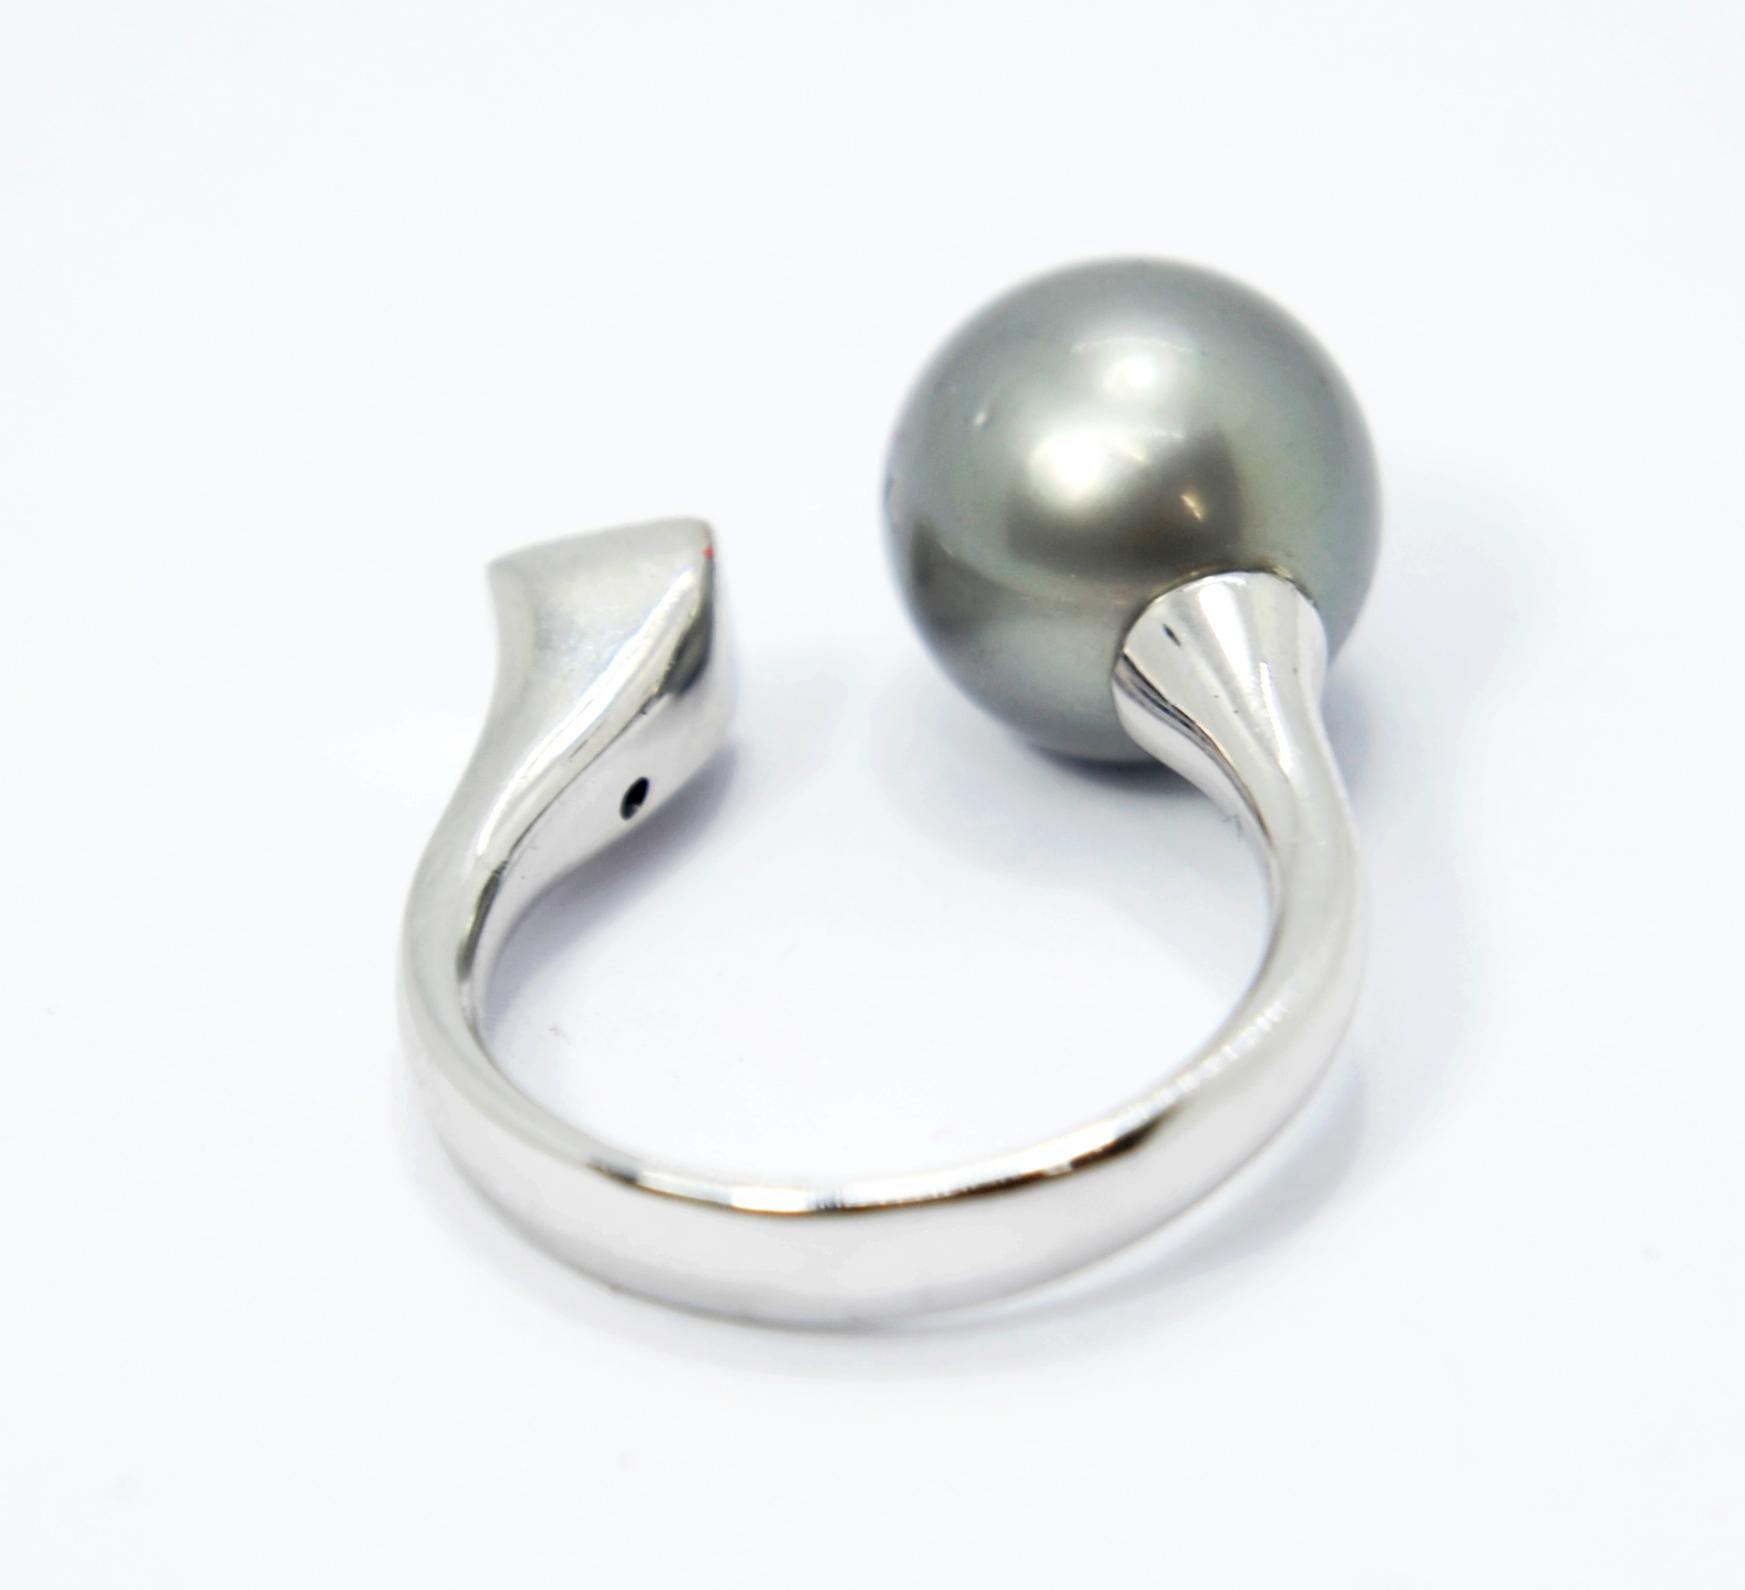 Irama Pradera is a Young designer from Spain that searches always for the best gems and combines classic with contemporary mounting and styles. 
Sleekly crafted in 18K white gold these romantic and classic cultivated grey tahiti pearl ring consist